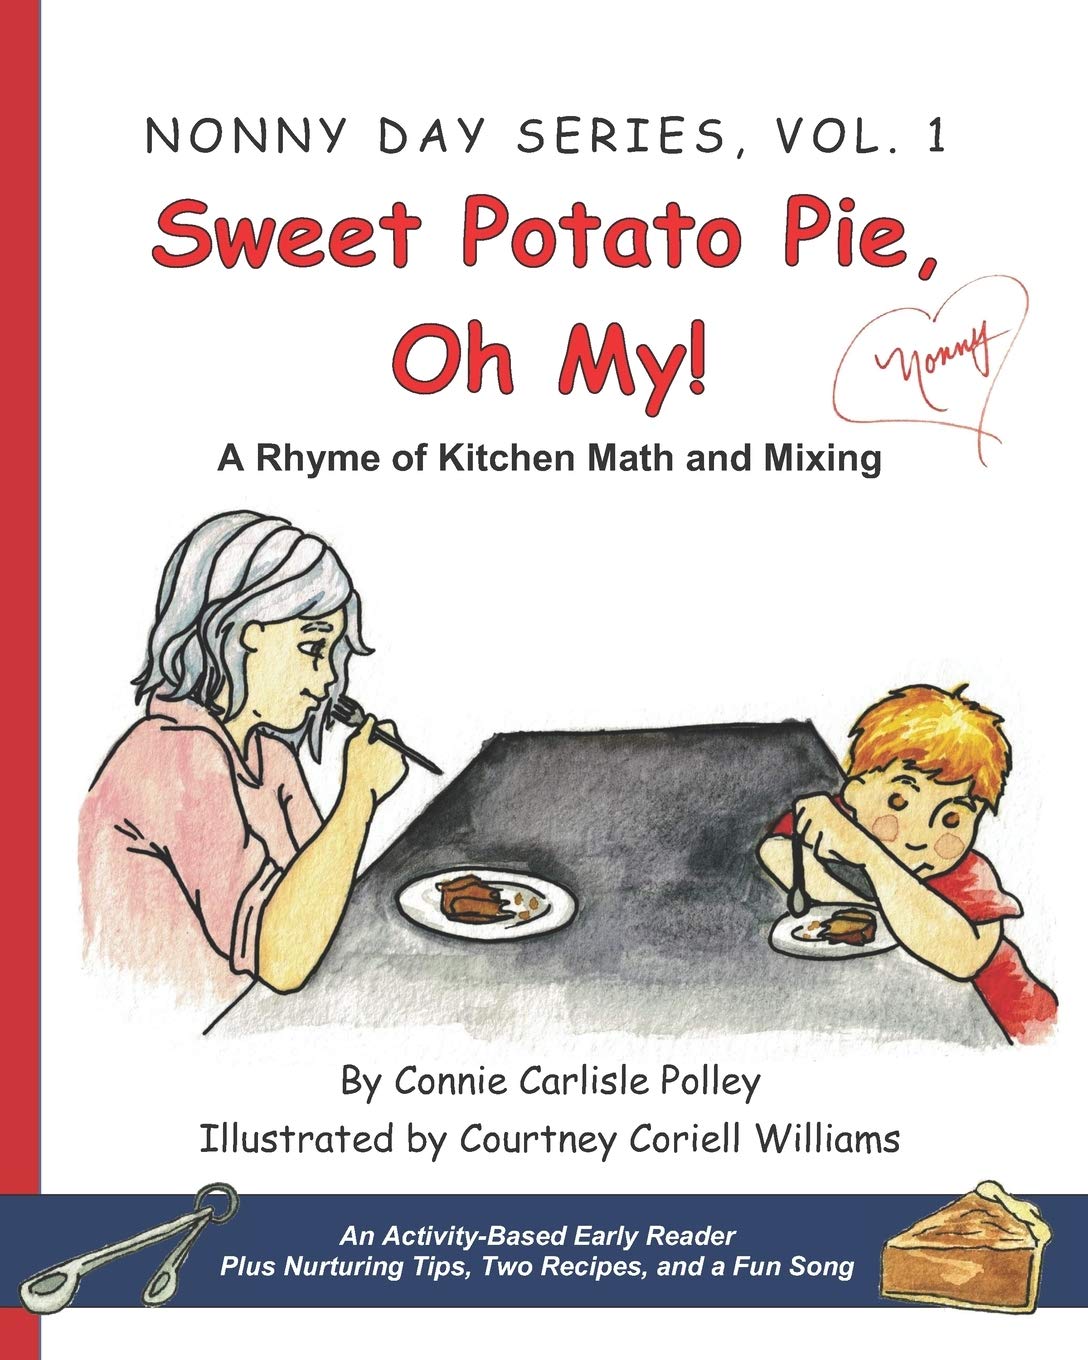 Front cover of Sweet Potato Pie, Oh My! By Connie Carlisle Polley, Illustrated by Courtney Coriell Williams